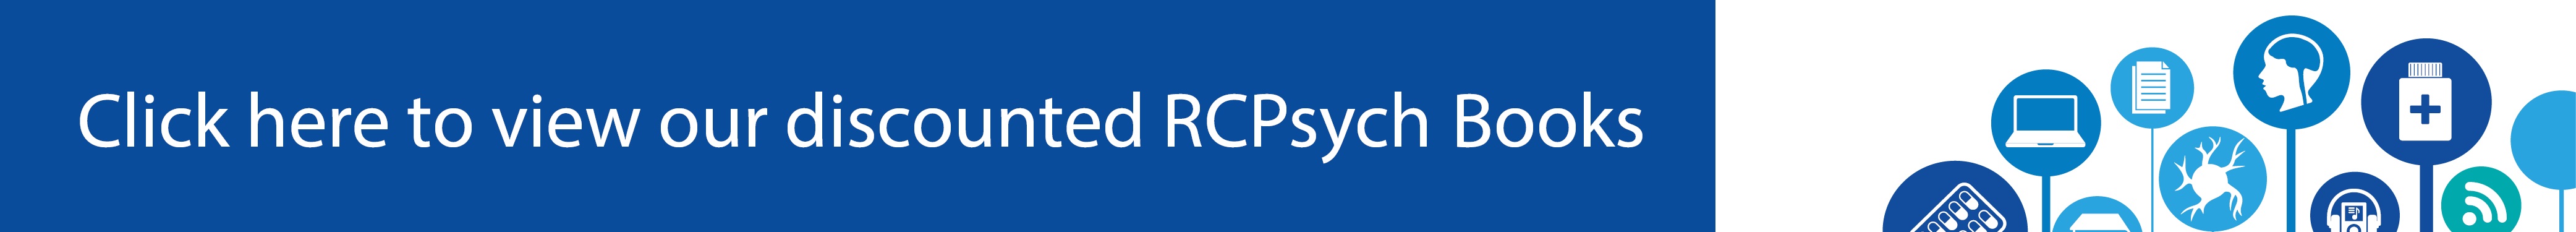 Click here to view all our RCPsych Books